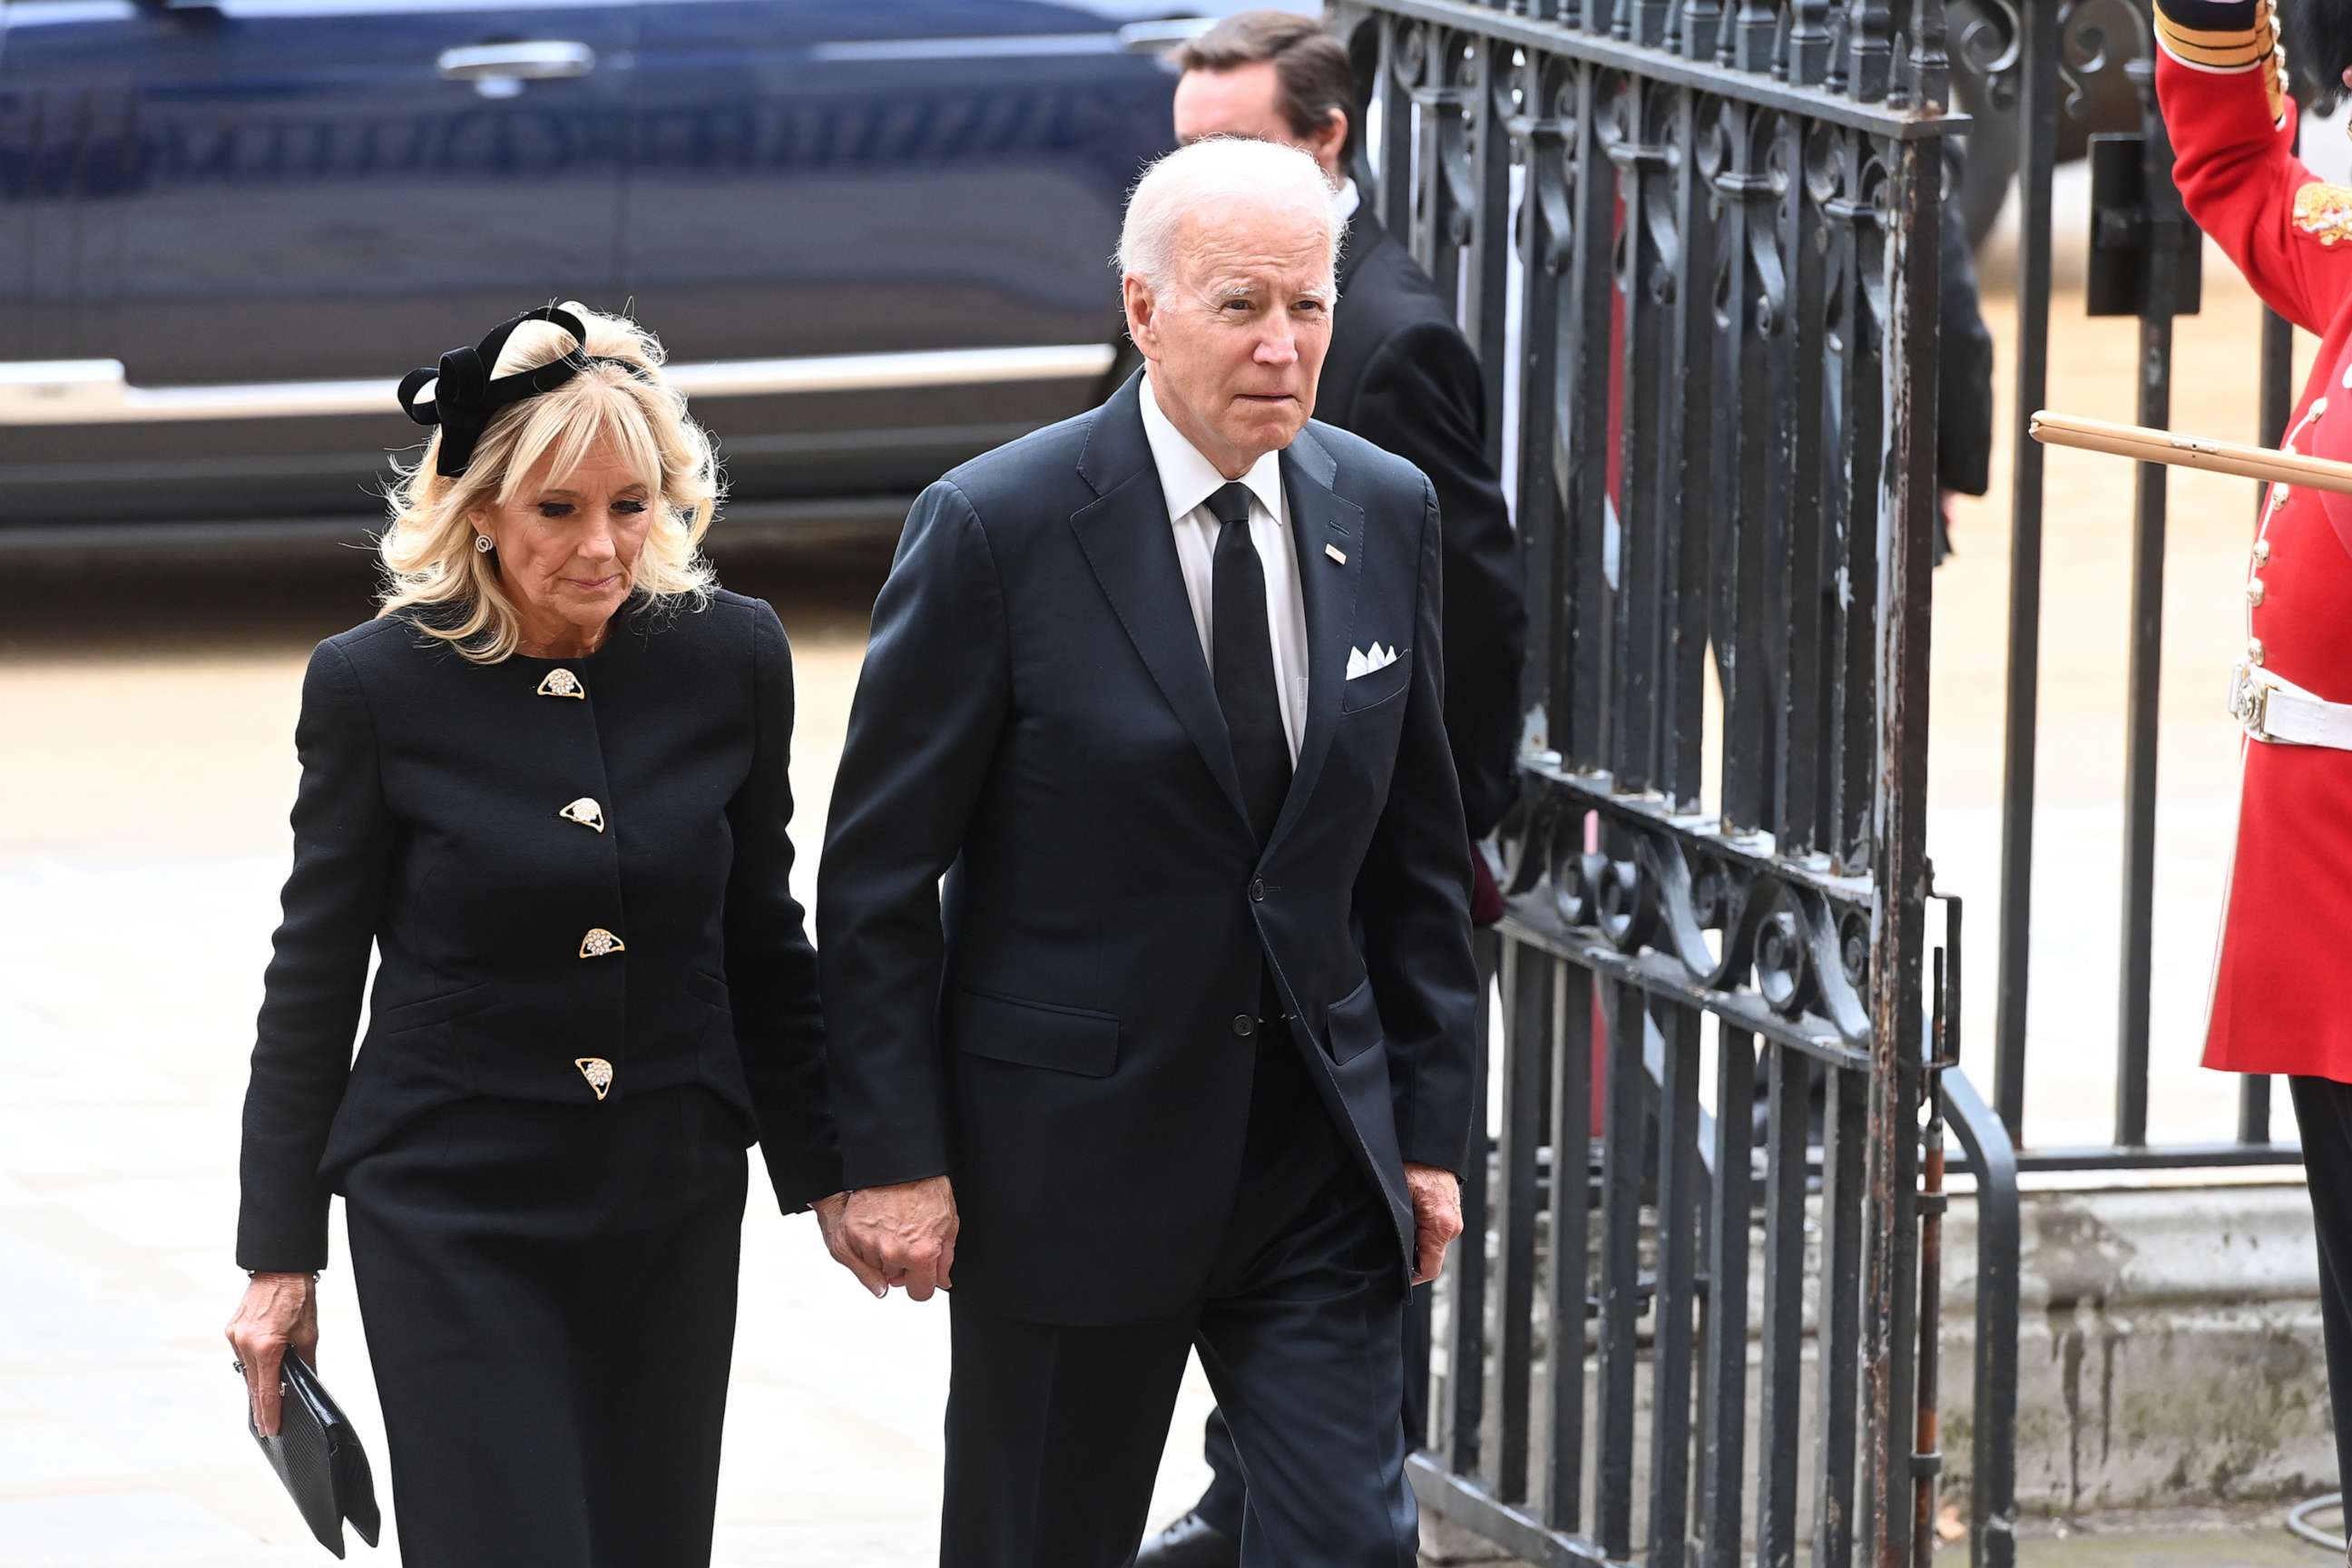 PHOTO: President Joe Biden and Jill Biden arrive for the State Funeral of Queen Elizabeth II at Westminster Abbey on Sept. 19, 2022 in London.